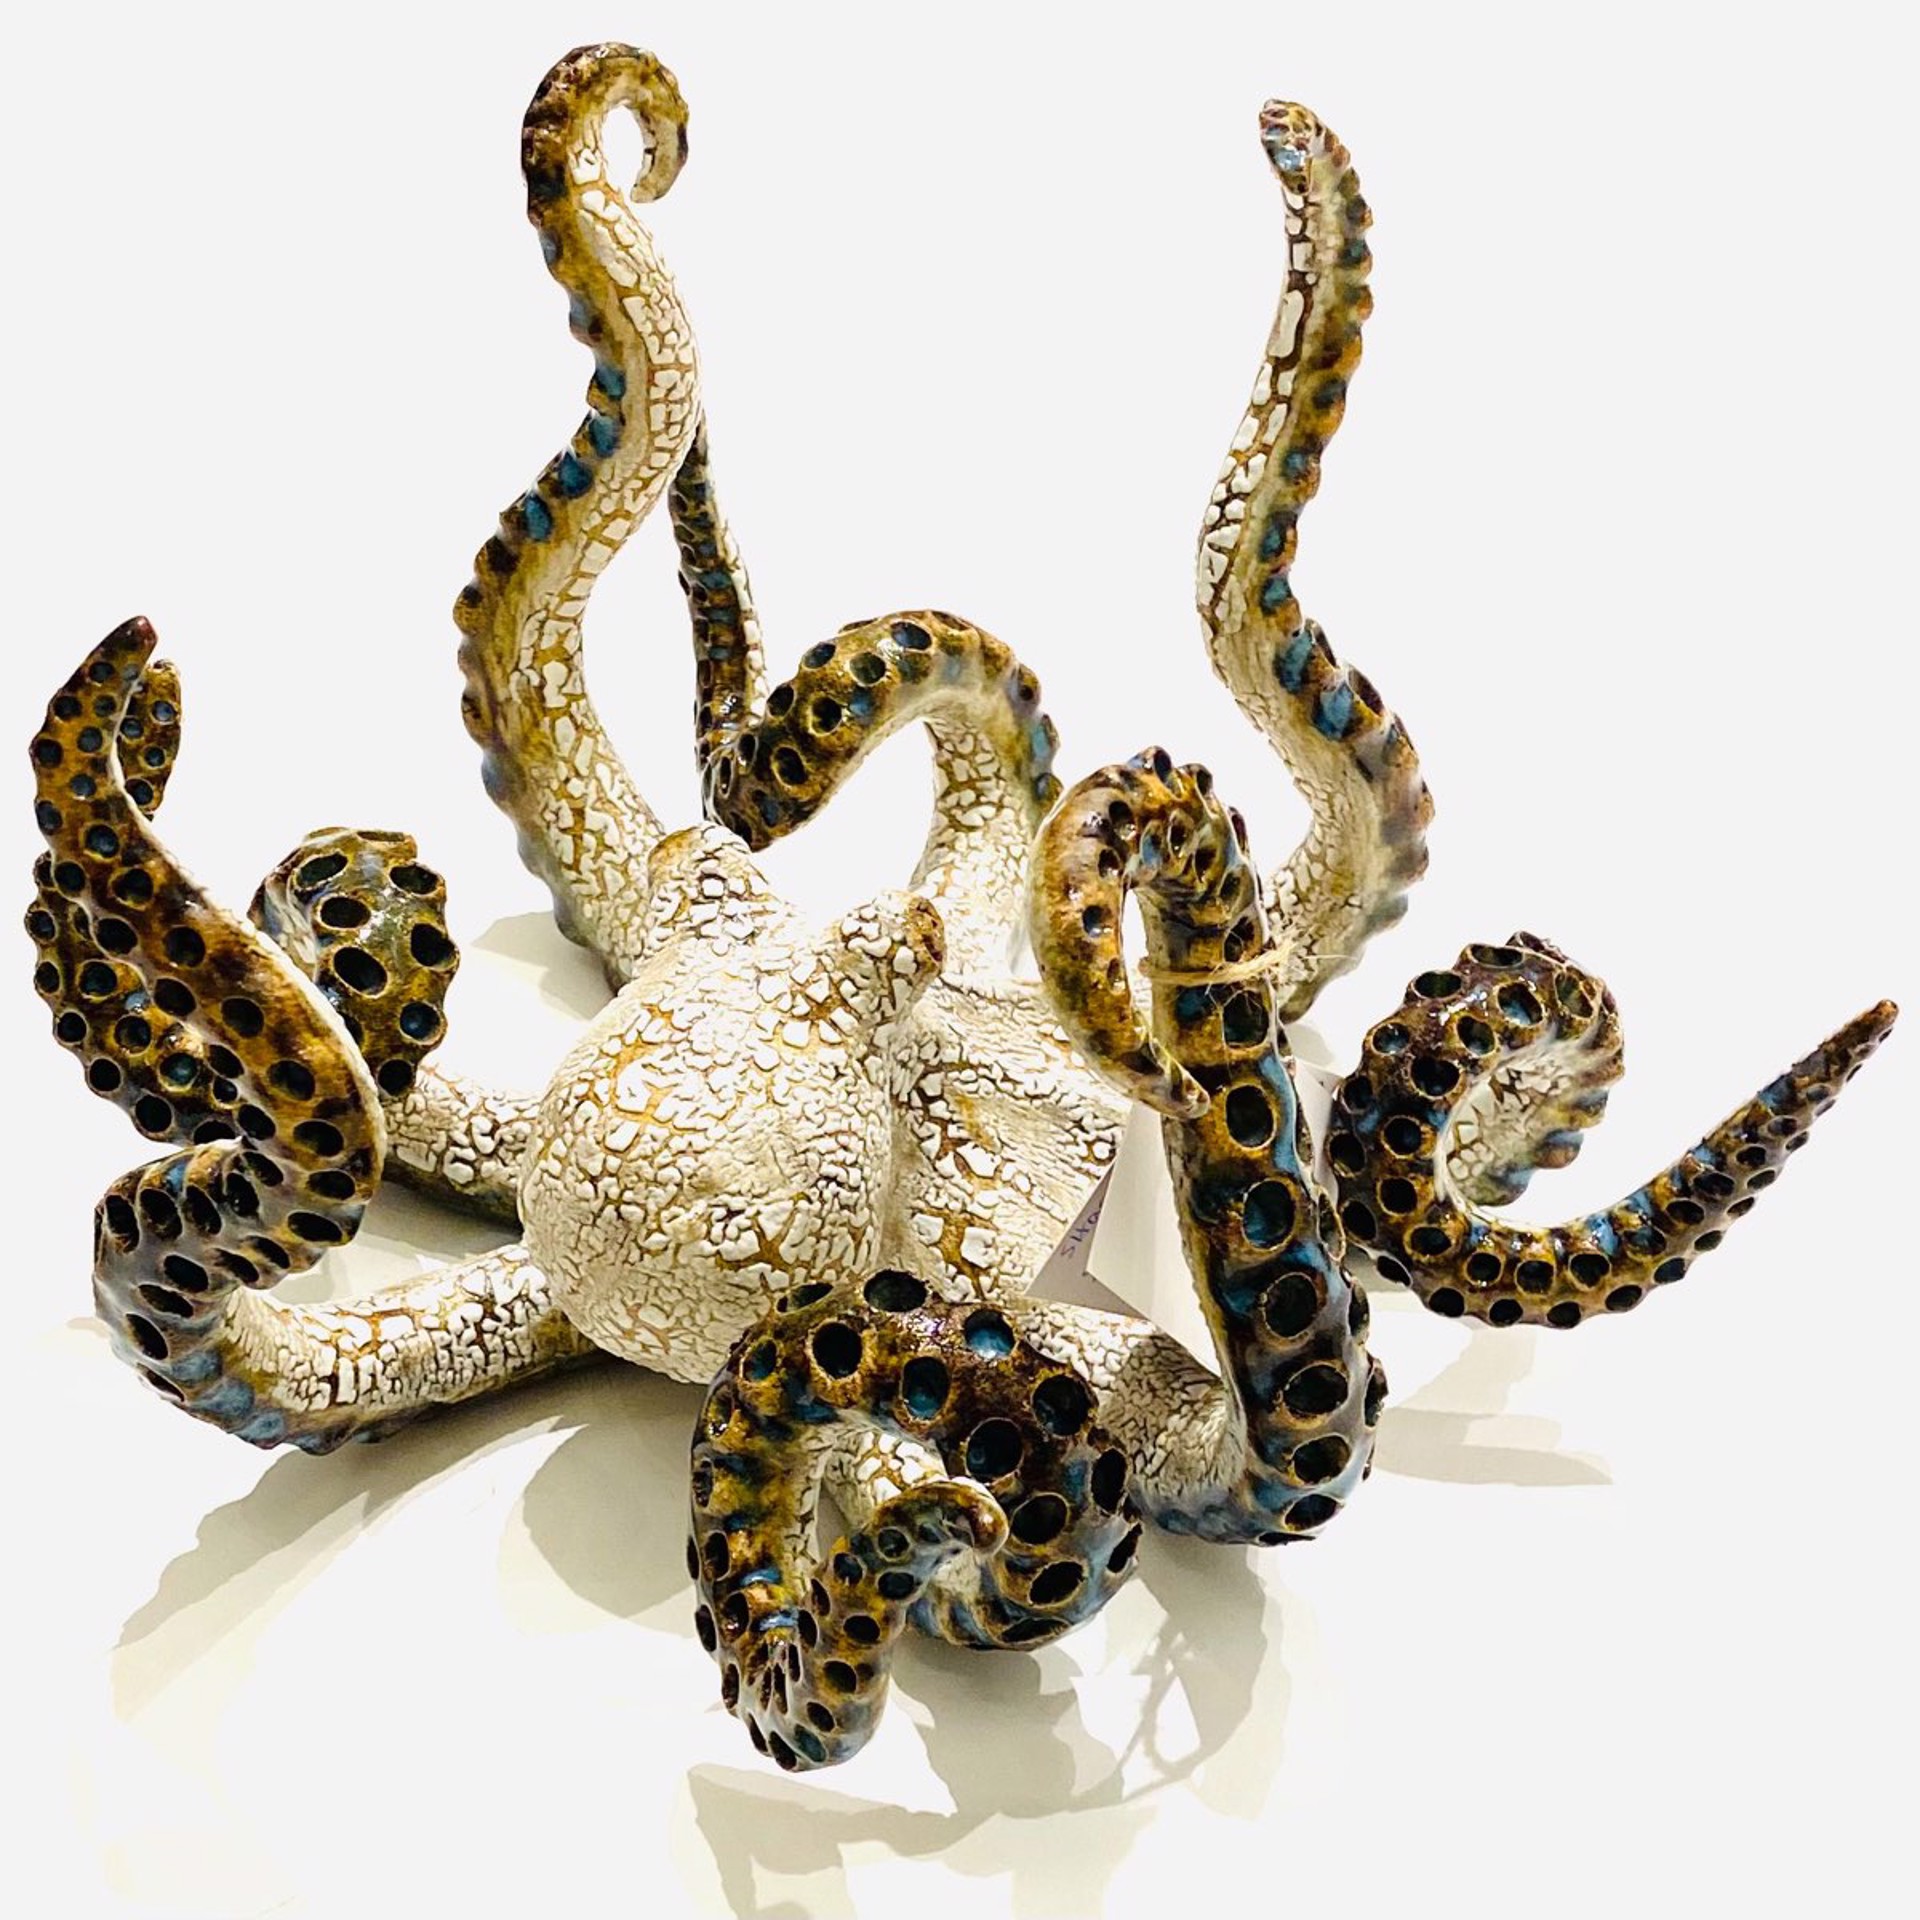 SG22-123 Small Table Octopus  (Ocean Blue) by Shayne Greco